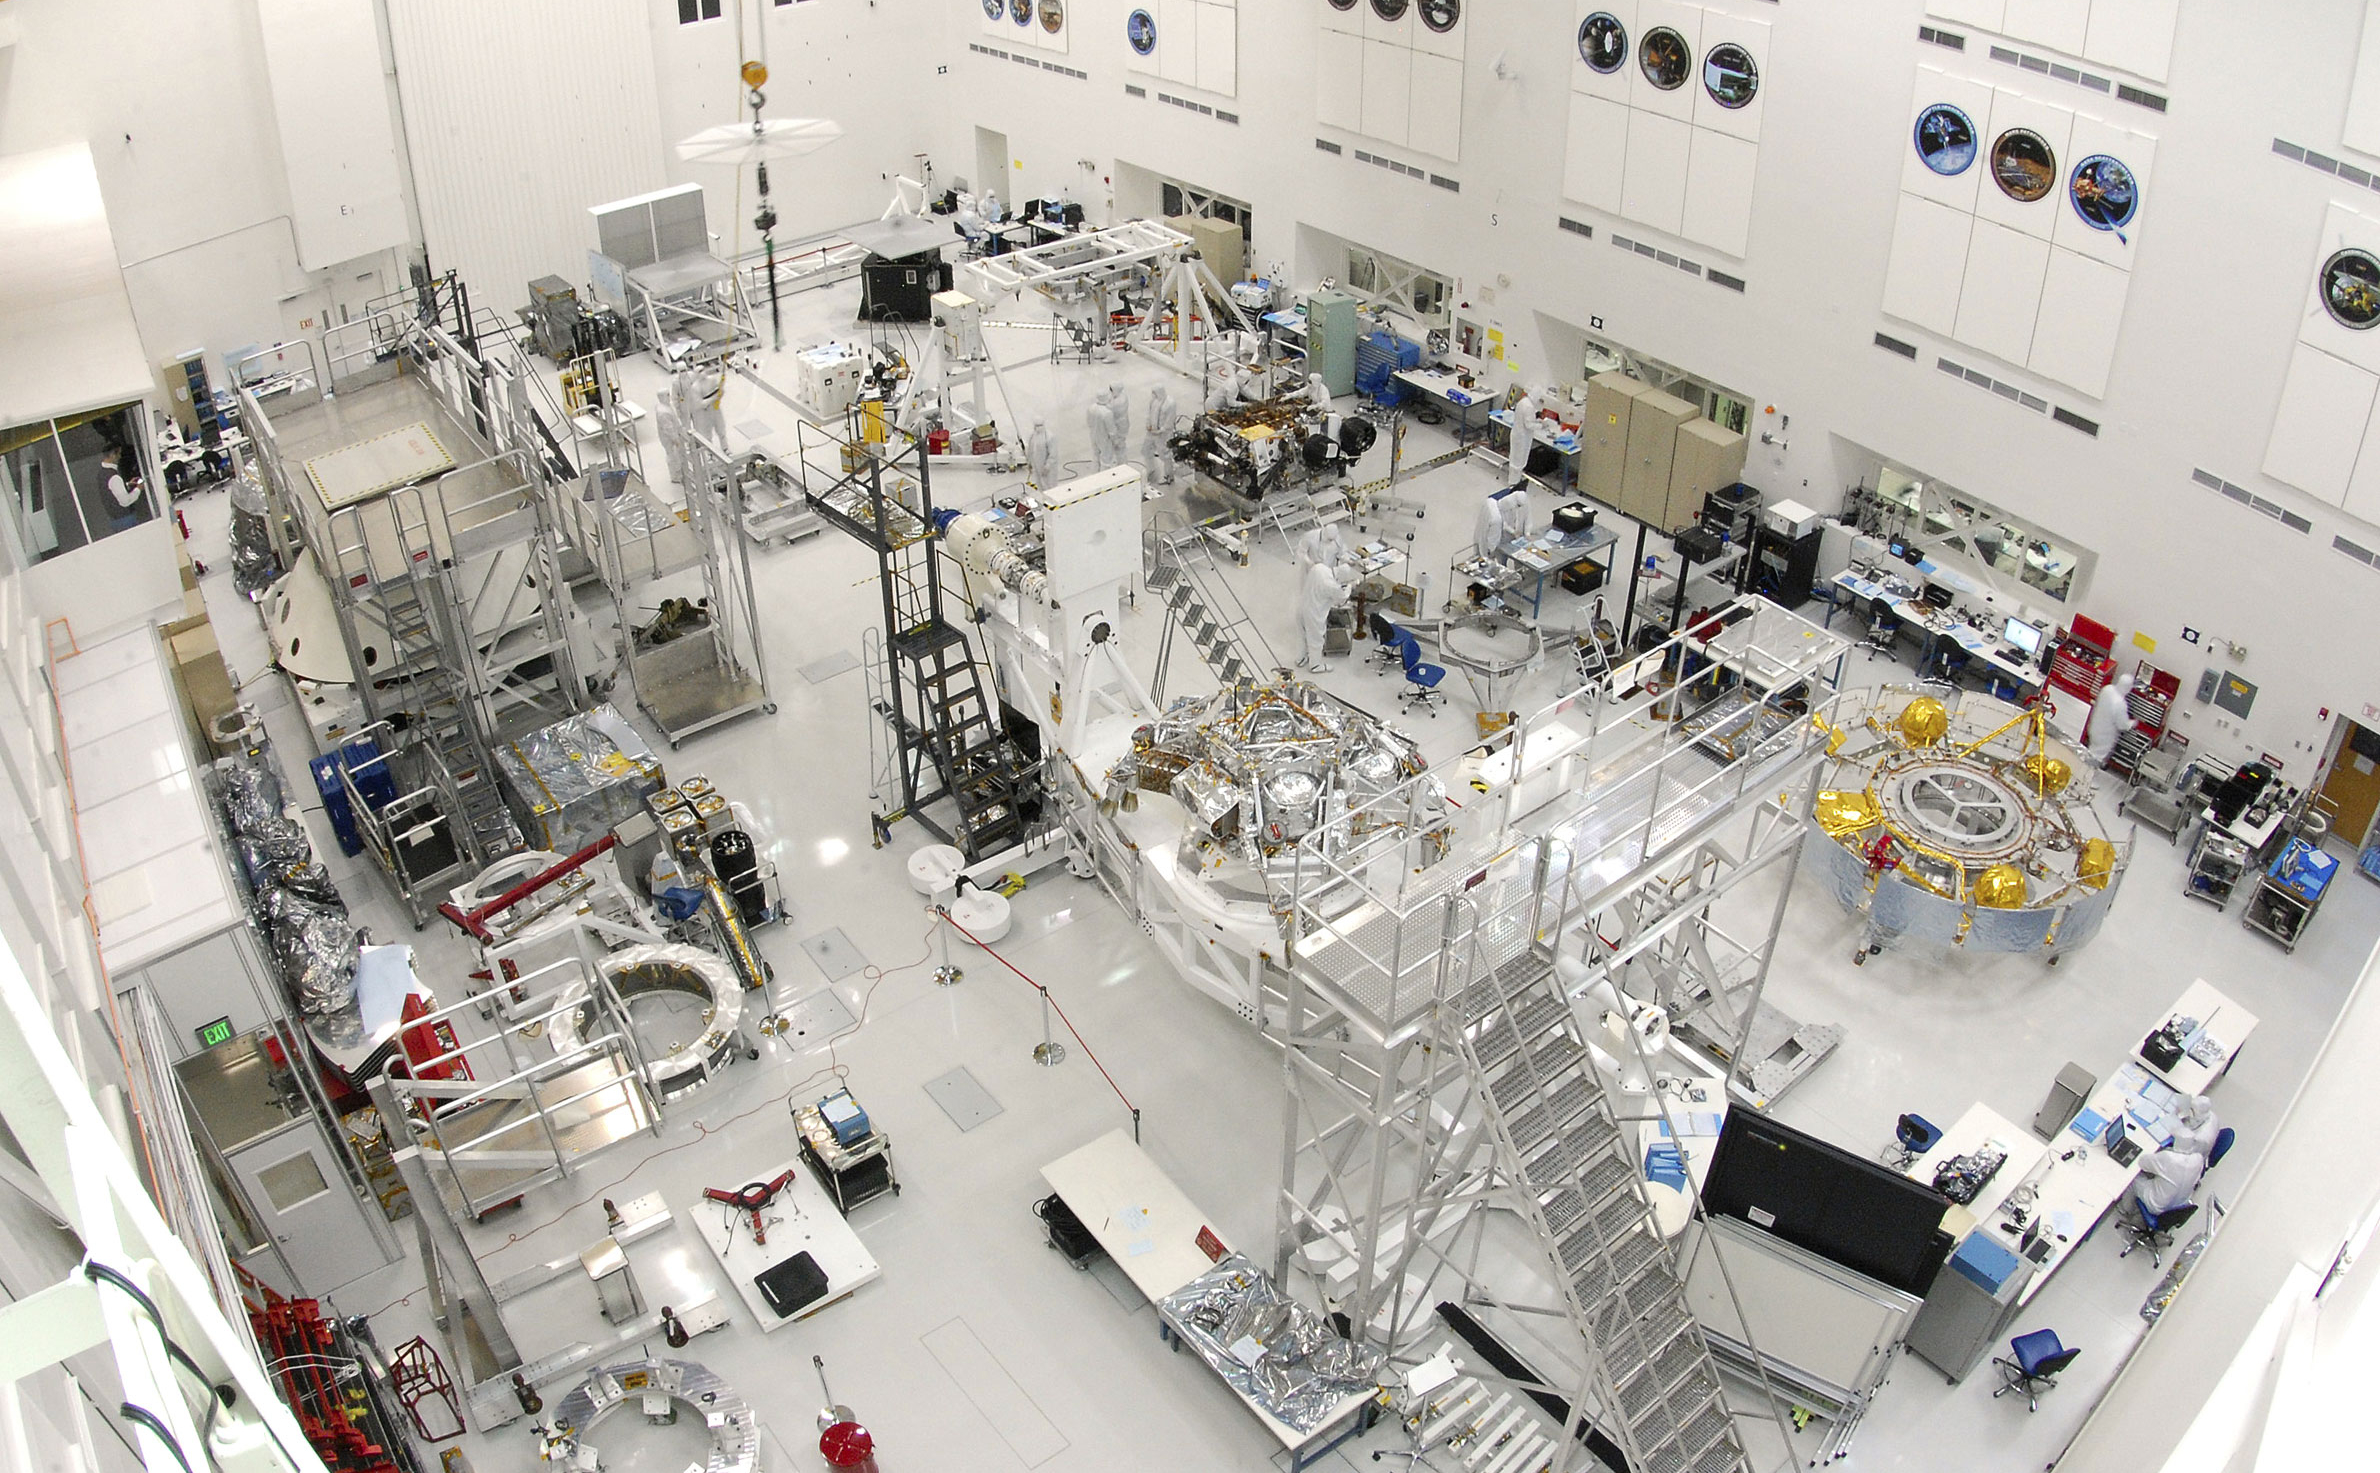 Working on Curiosity in JPL Spacecraft Assembly Facility